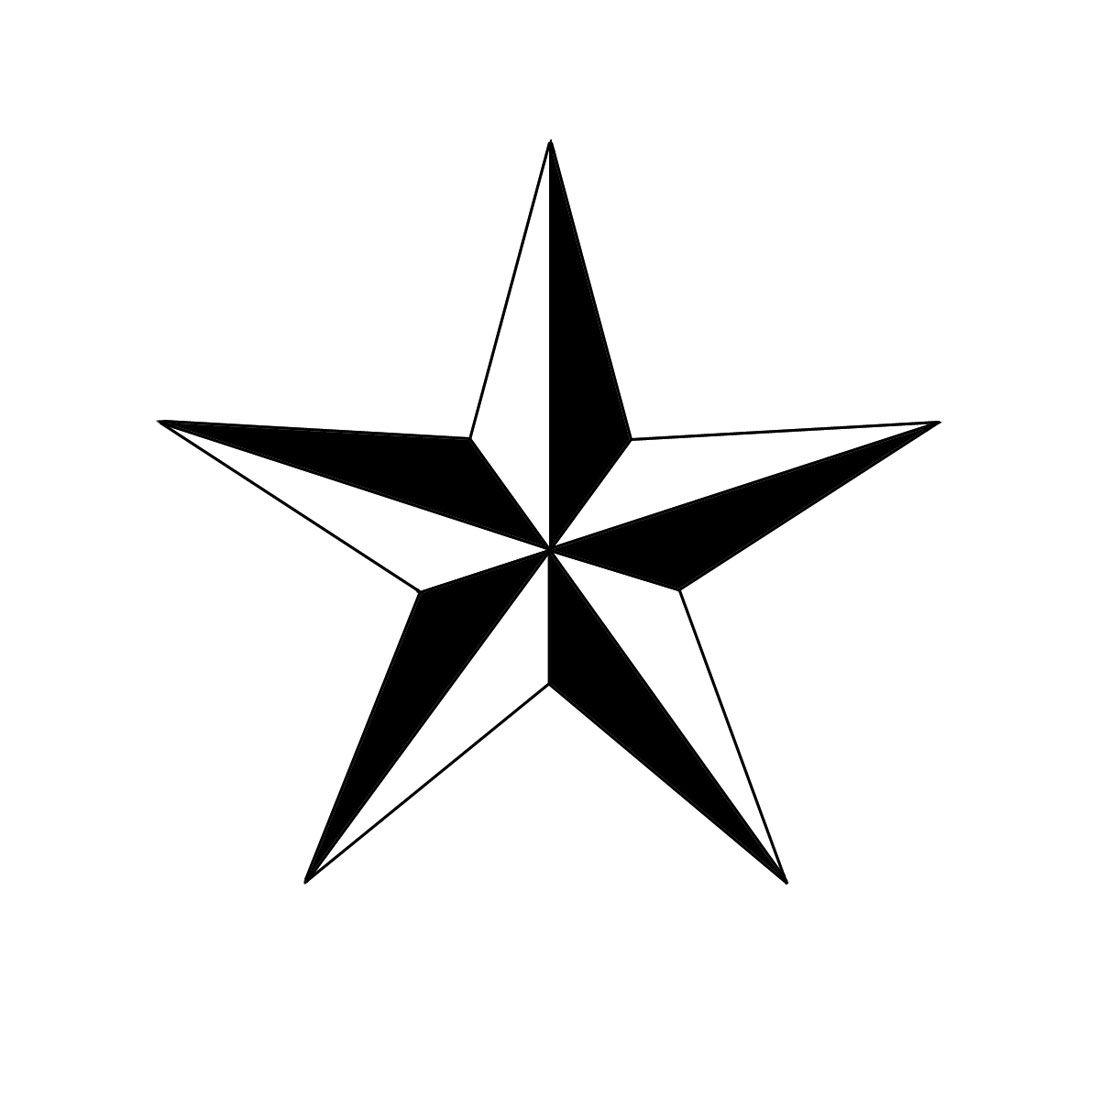 Volcom Star Logo - How to Draw a Nautical Star: 6 Steps (with Pictures) - wikiHow